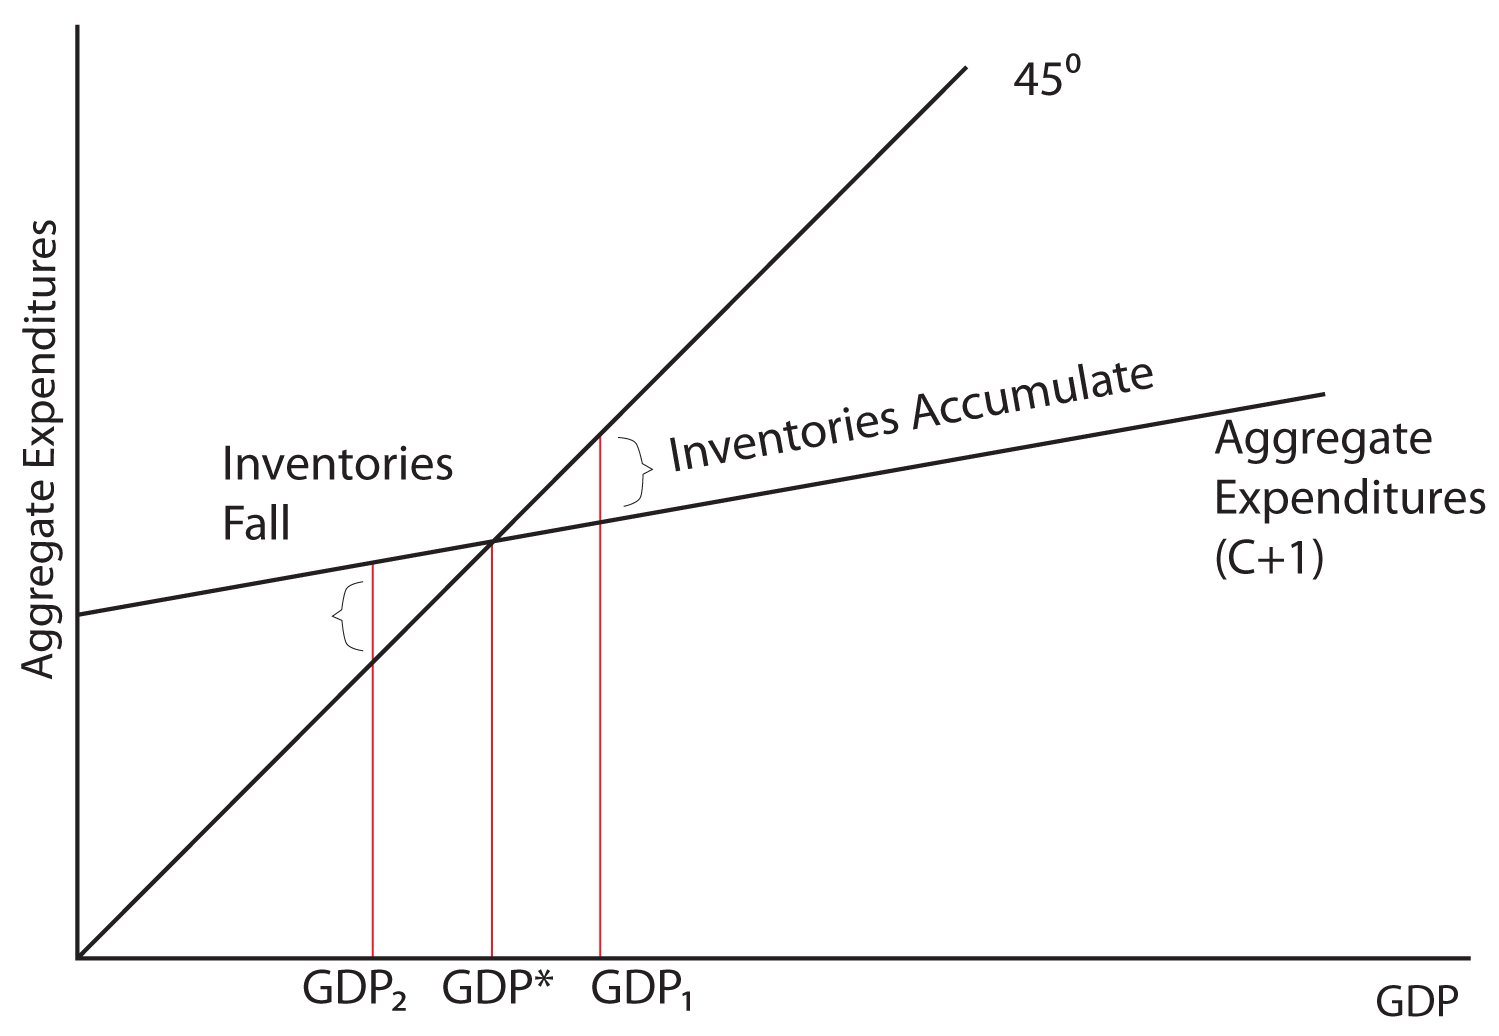 Image 7.02: The picture shows a graph of the Aggregate Expenditures Model. The y axis is labeled Aggregate Expenditures, and the x axis is labeled GDP. A 45 degree line is drawn from the origin. A line with the slope of C + 1 originates higher on the y axis and intersects the 45 degree line at point E. A vertical line is drawn from point E to the x axis at the value of the GDP. A vertical line is drawn before the point of intersection to the x axis at the point of GDP subscript 1. The area created by this vertical line between the 45 degree line and the line of slope C + 1 is labeled Inventories Fall. A vertical line is drawn after the point of intersection to the x axis at the point of GDP subscript 2. The area created by this vertical line between the 45 degree line and the line of slope C + 1 is labeled Inventories Accumulate.